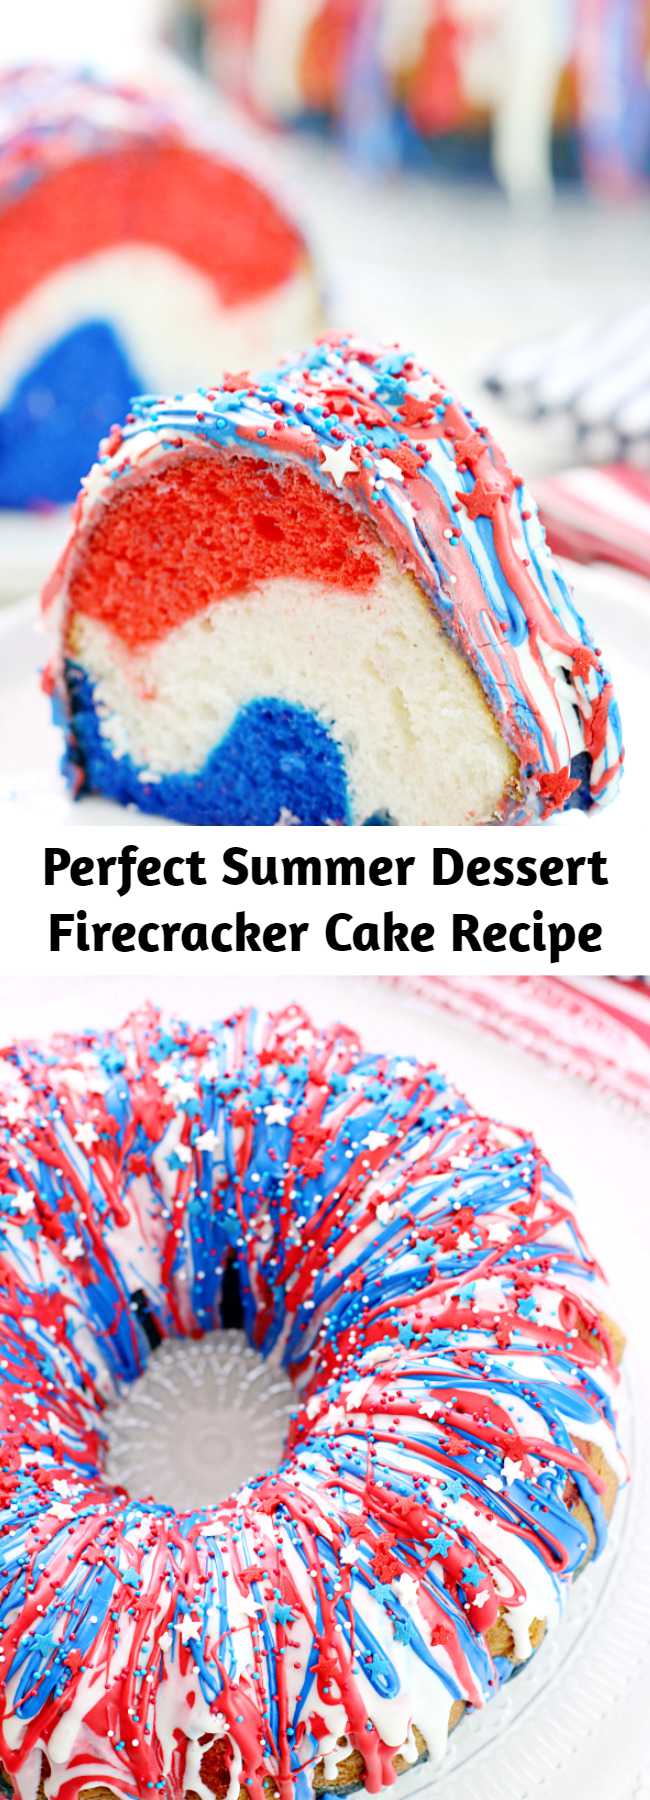 Perfect Summer Dessert Firecracker Cake Recipe - Show your patriotism with this Firecracker Cake! The red, white, and blue runs inside and out!! Great for Memorial Day, the 4th of July or any occasion you want to share a little American pride!